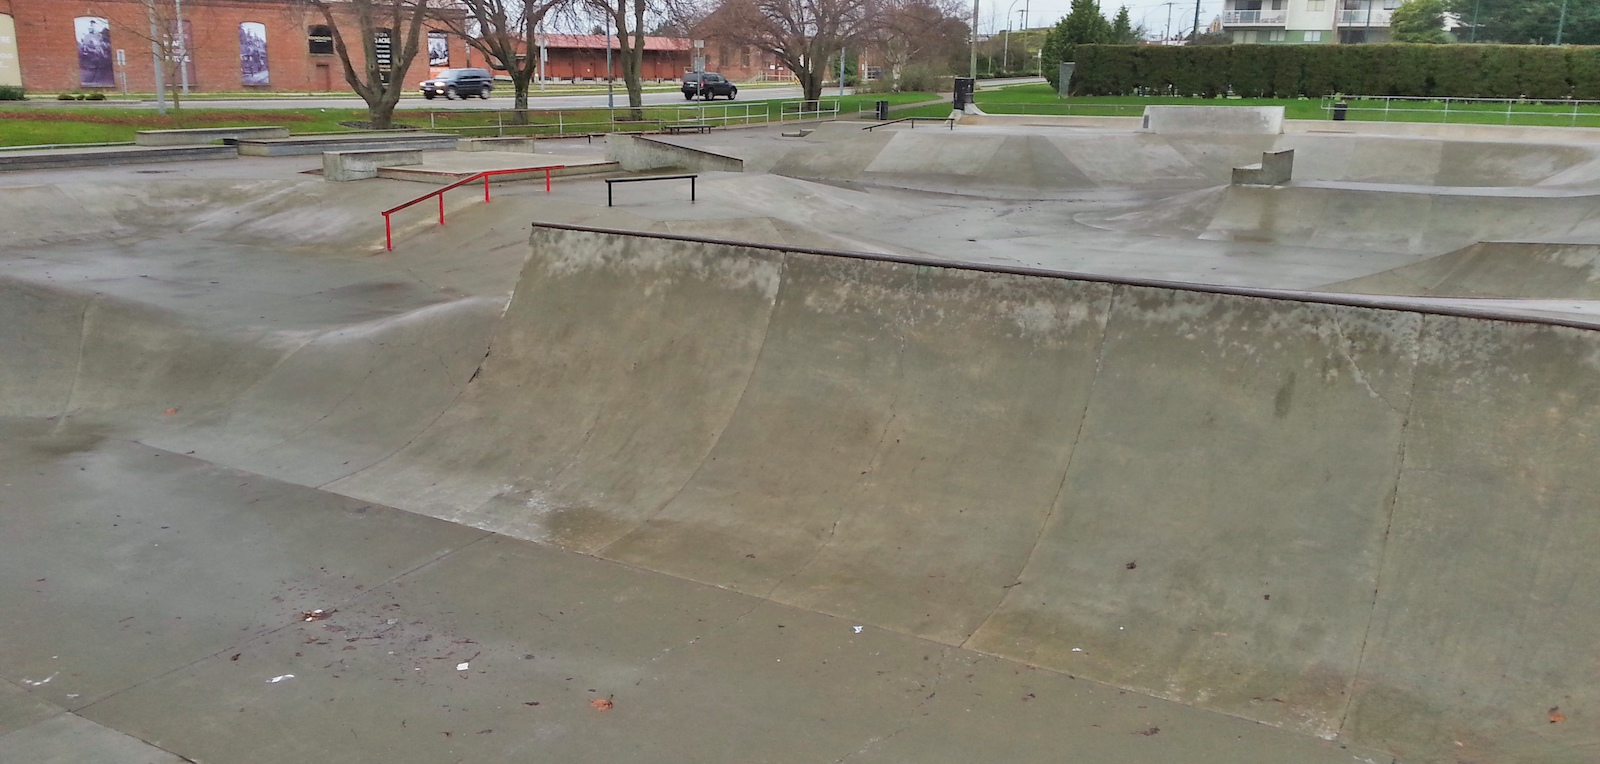 9am skate park visit! nice to get out and tool around before breakfast. 5th ride.